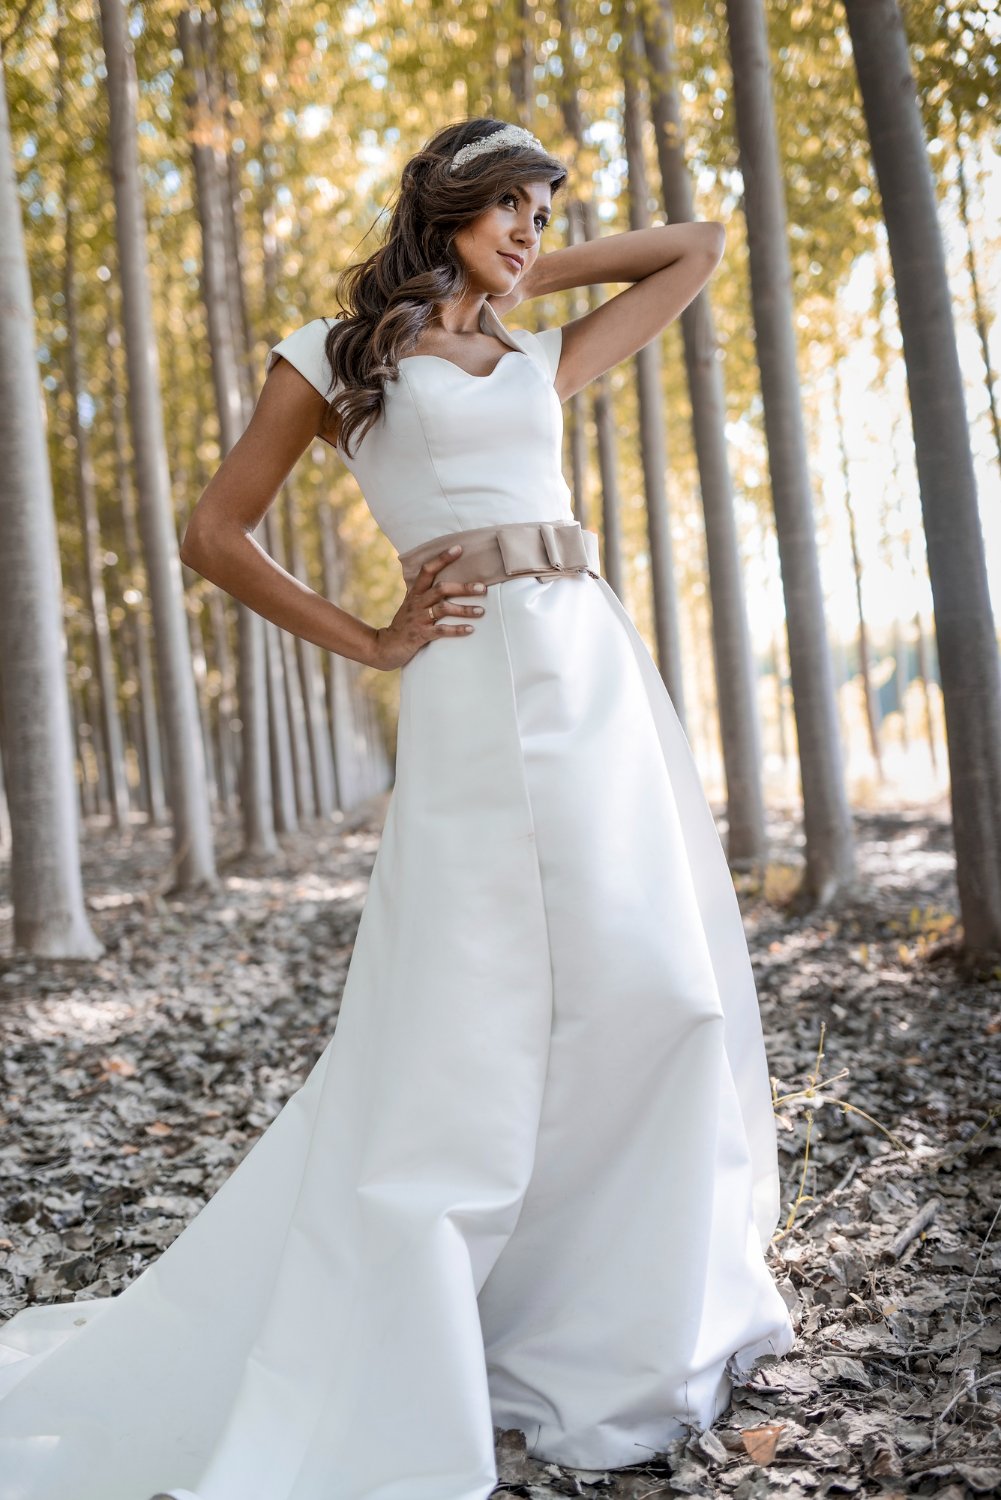 beautiful bride outdoors in a forest